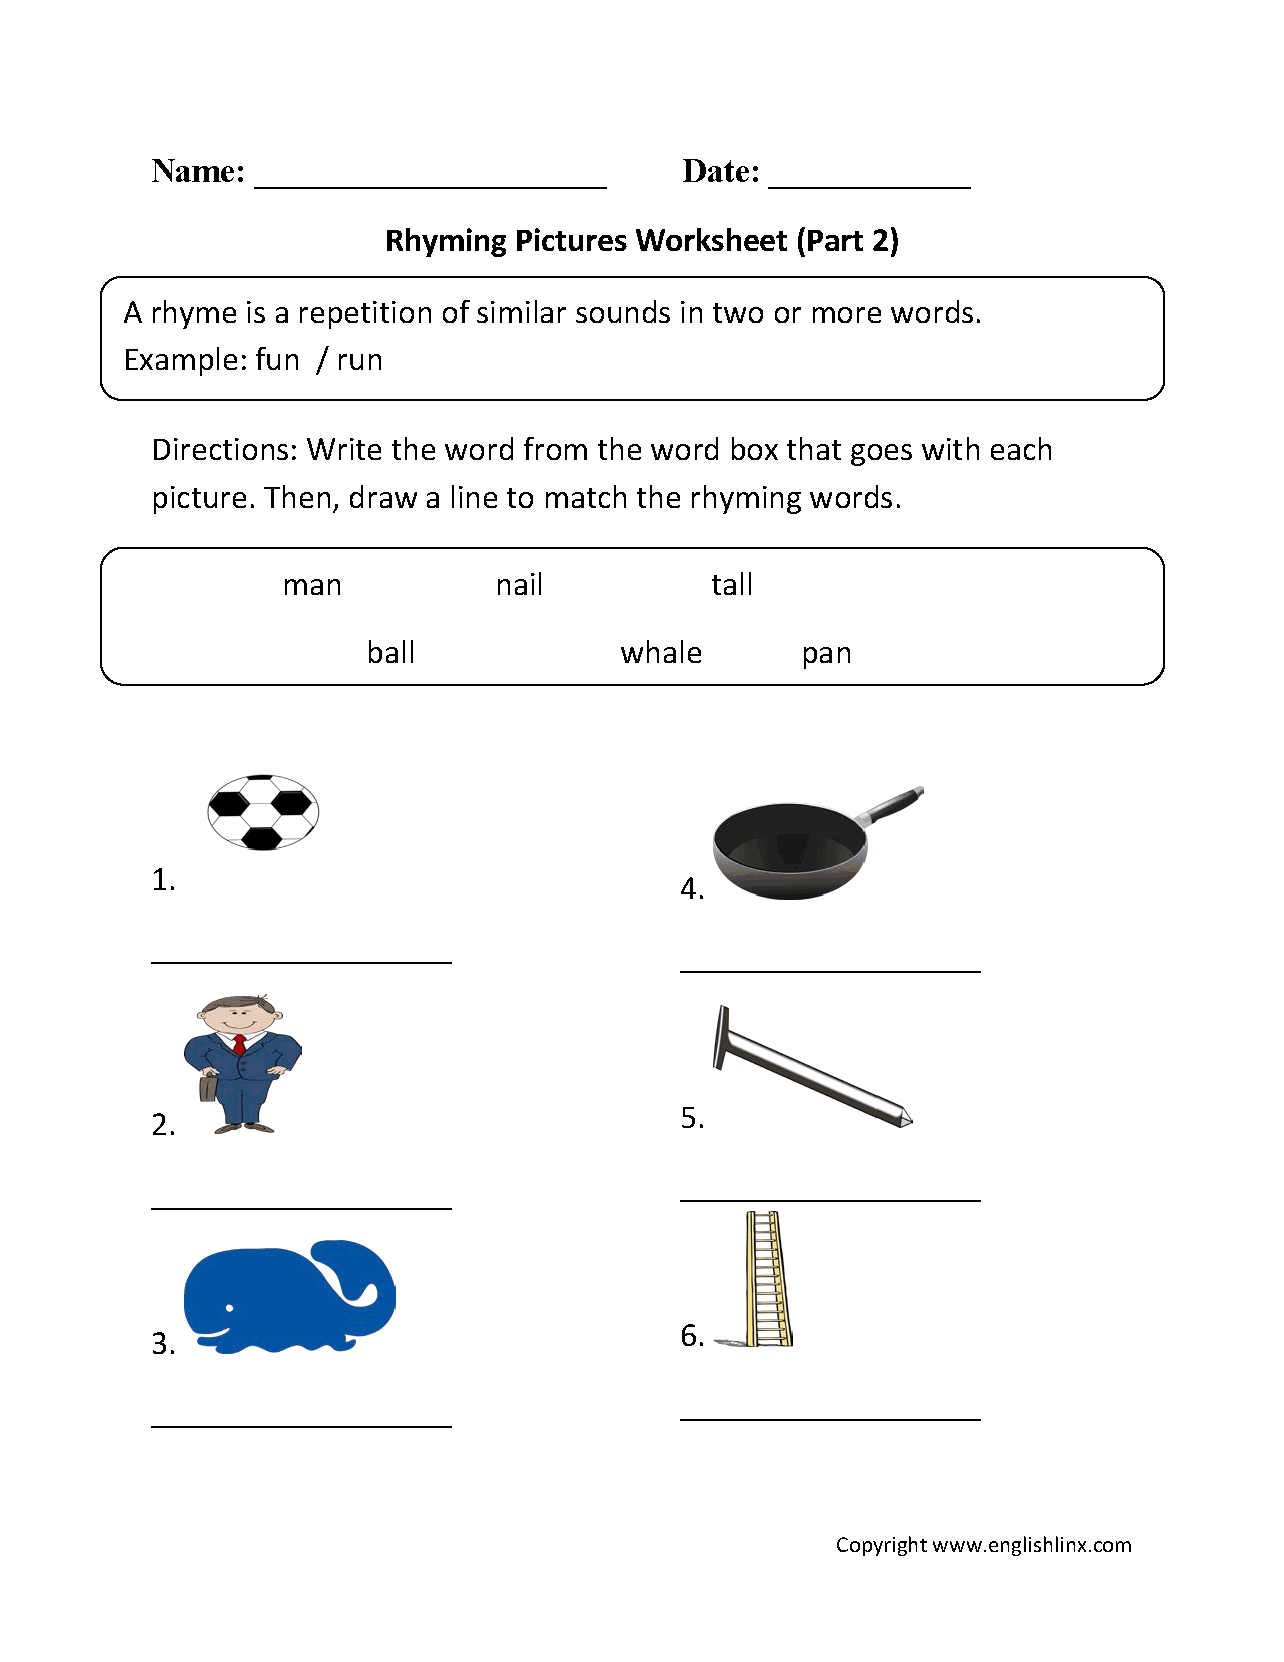 Rhyming Pictures Worksheets Part 2